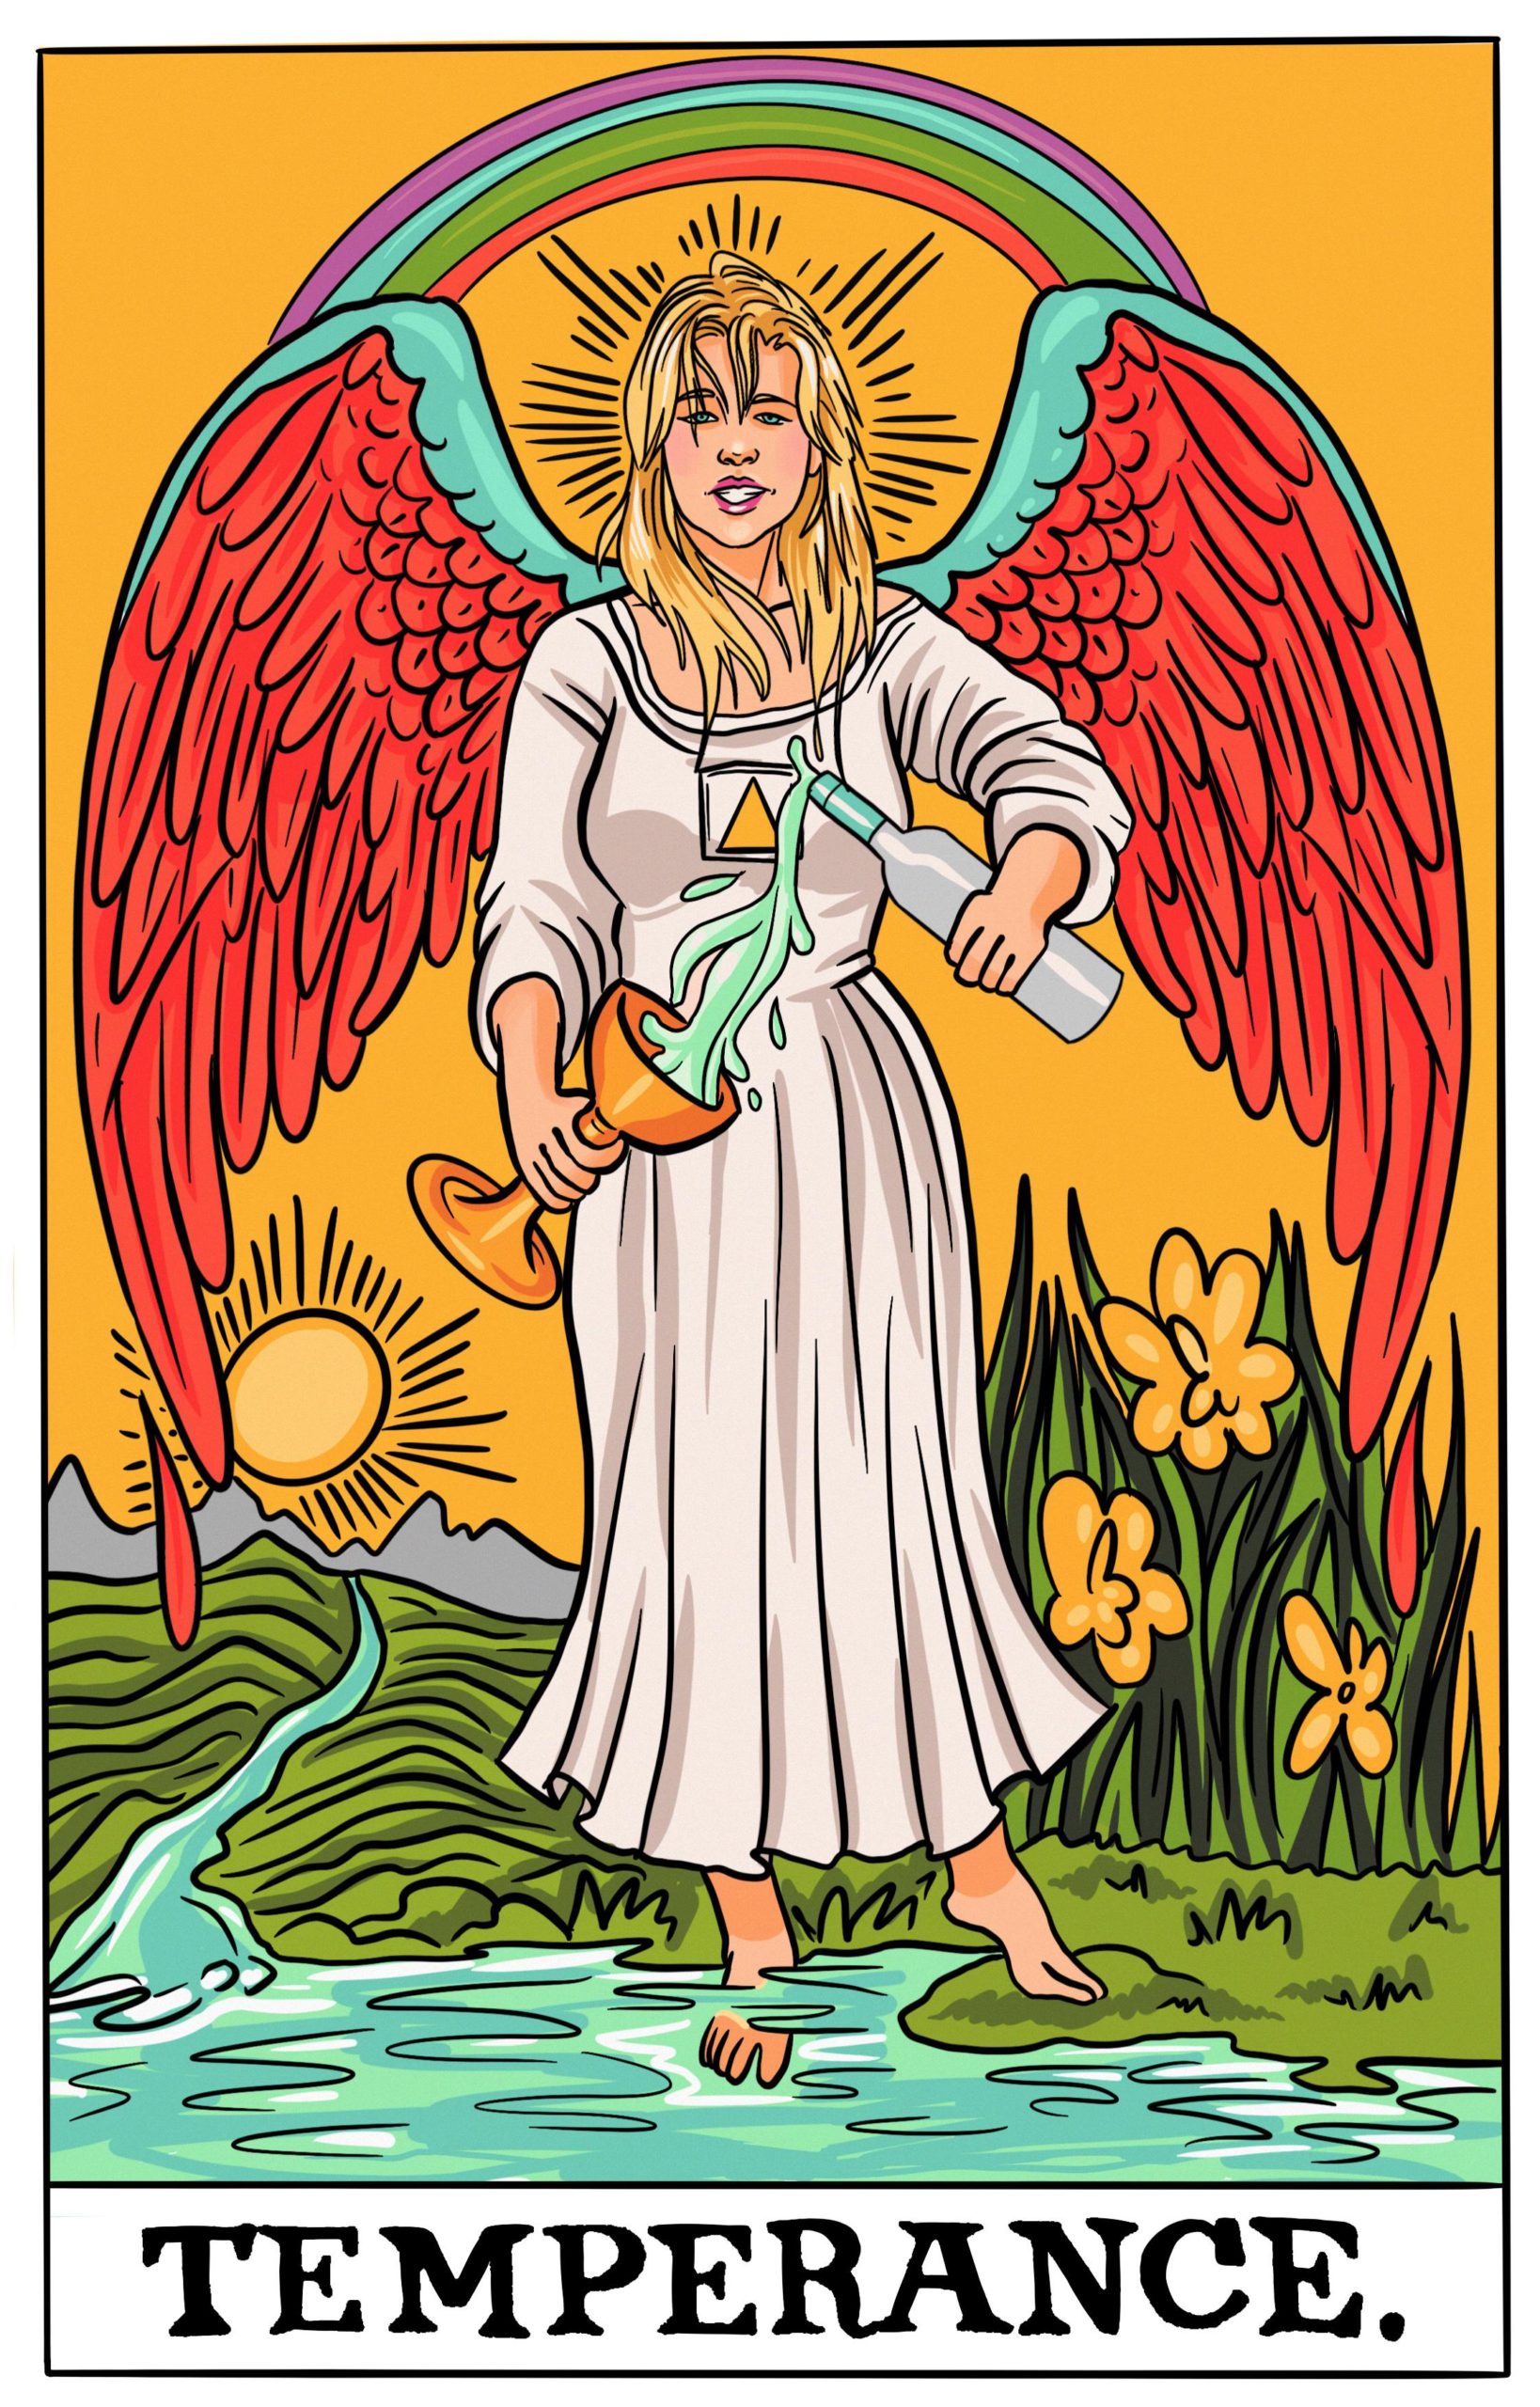 Read more about the article Temperance – Tarot Yes Or No